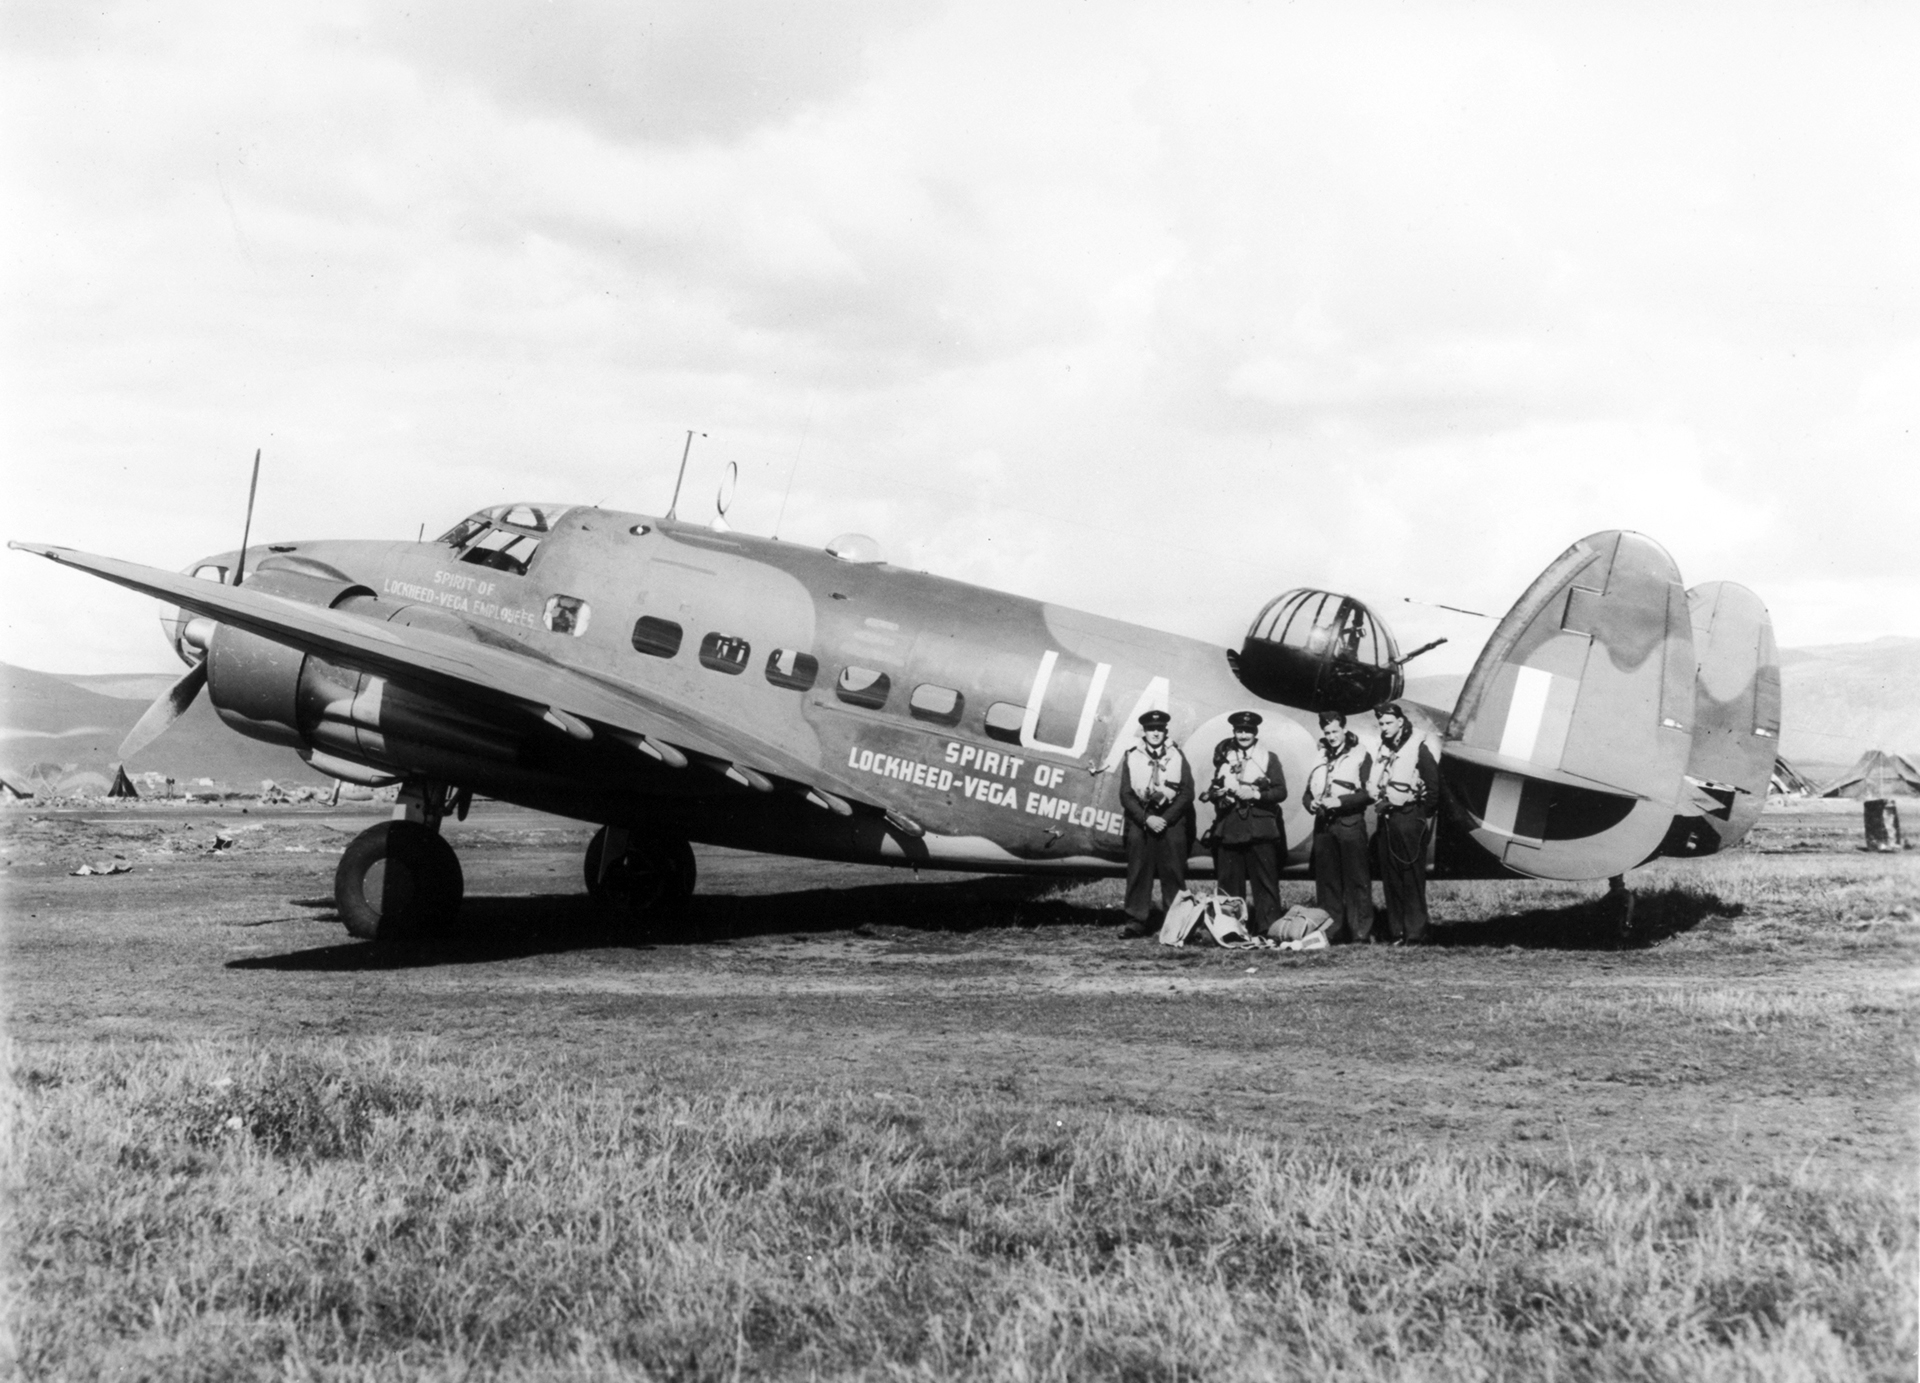 Spirit of Lockheed Vega Employees, with RAF crew. The aircraft was donated by Lockheed and Lockheed employees.